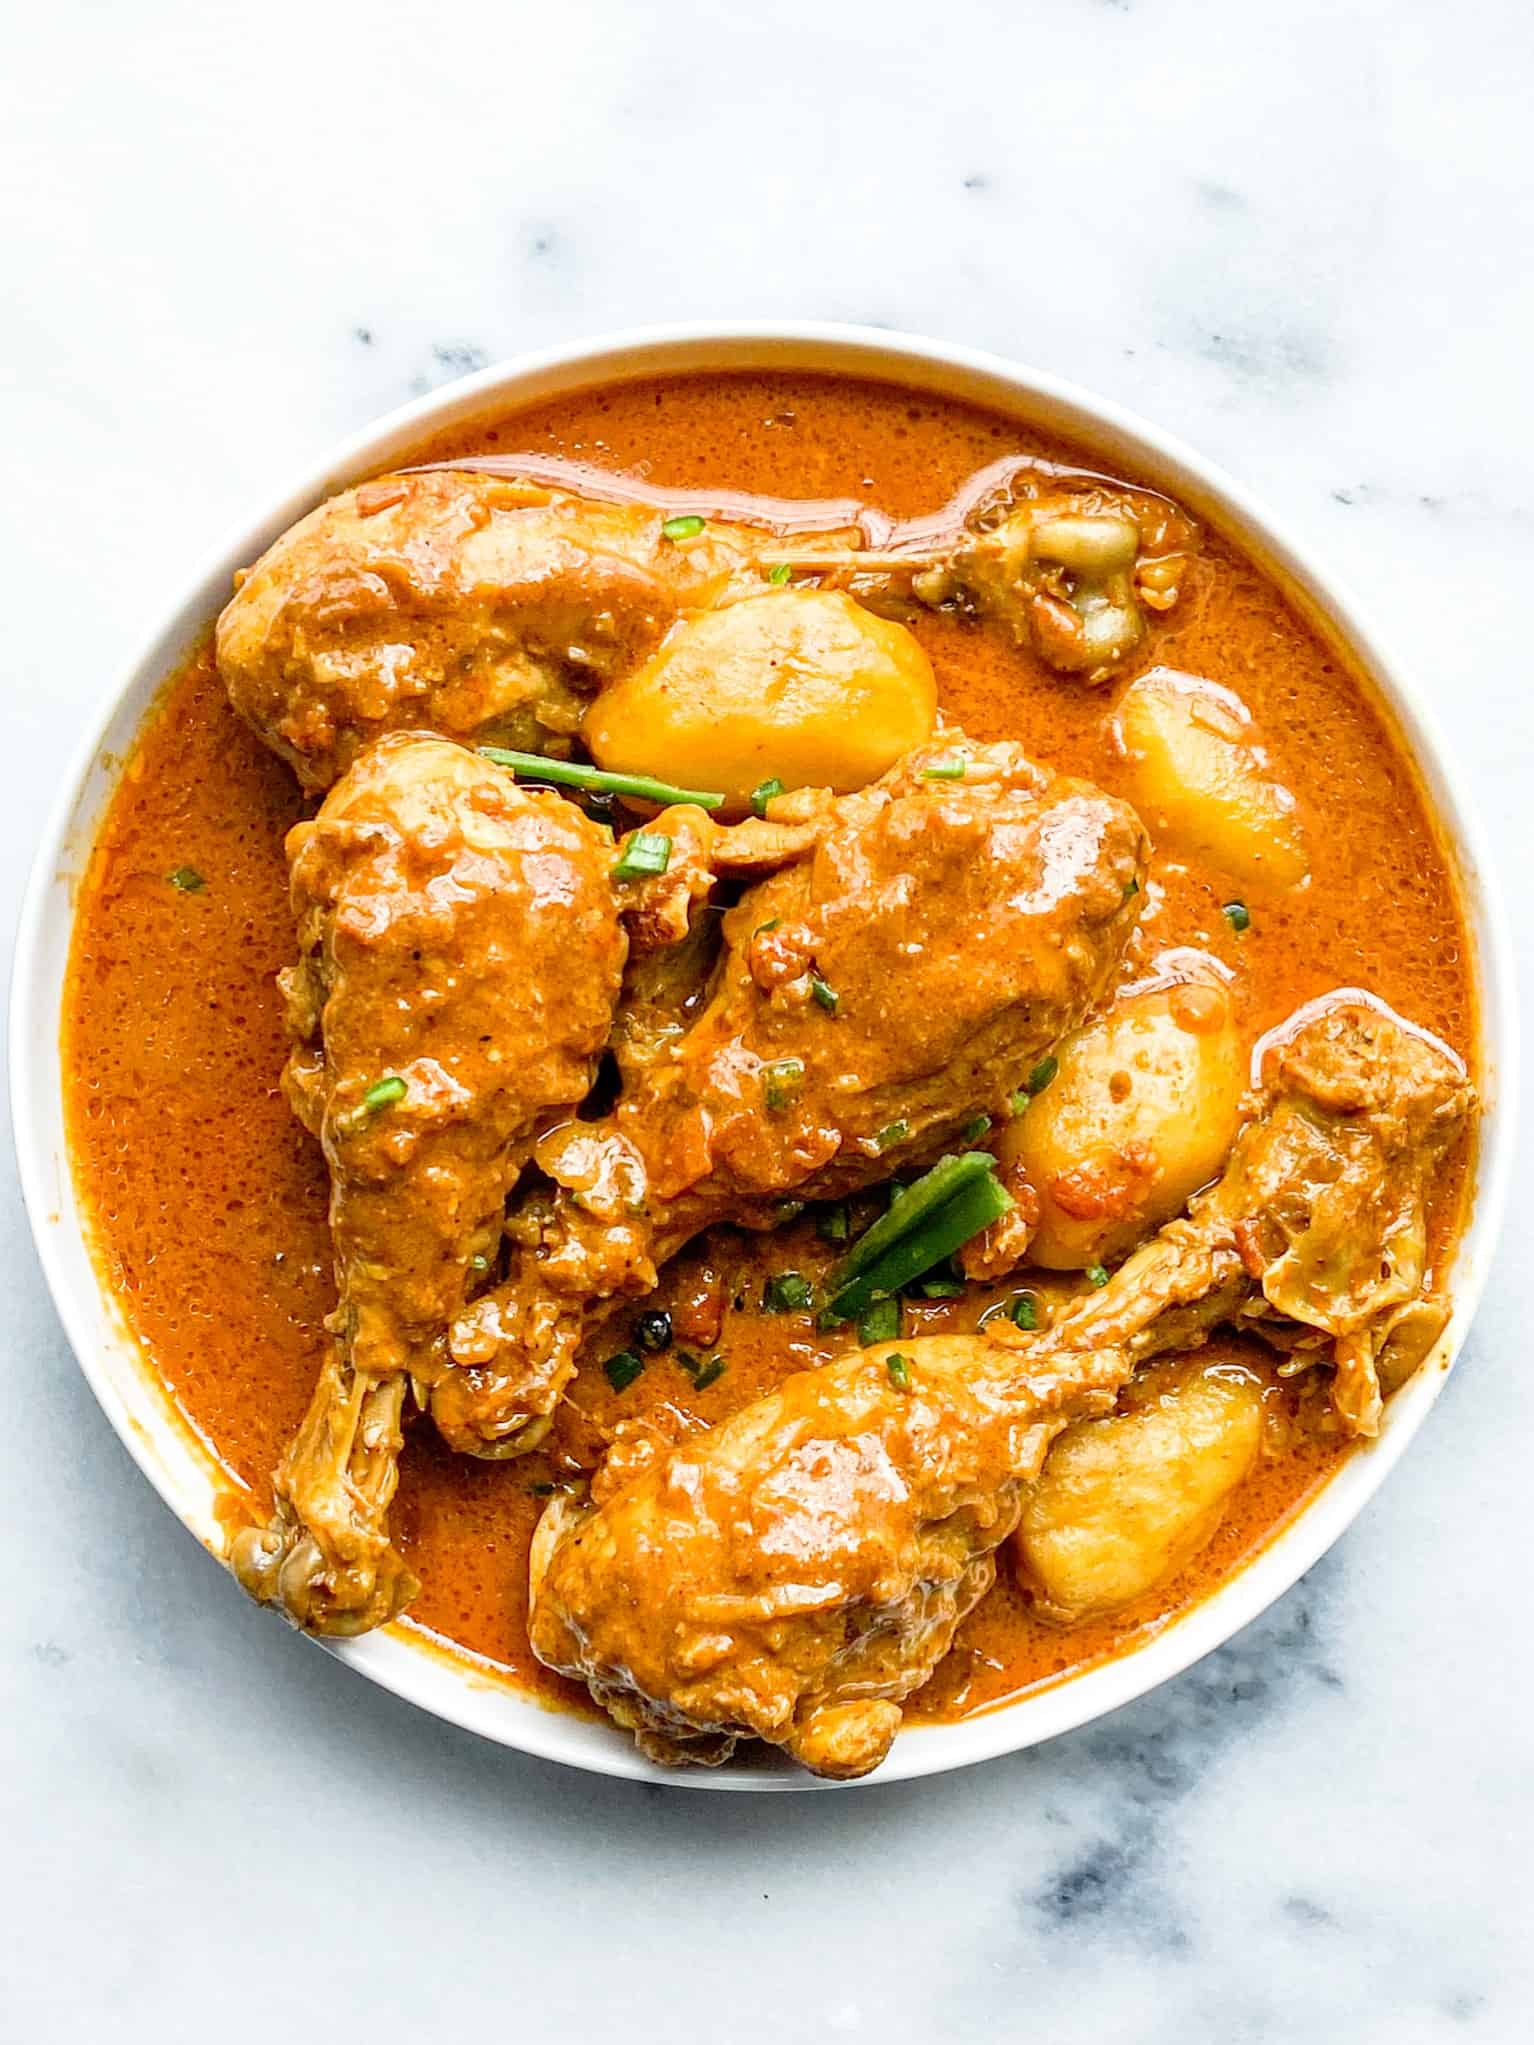 16 South Indian Chicken Curry Recipe Coconut Milk You Won't Believe The ...